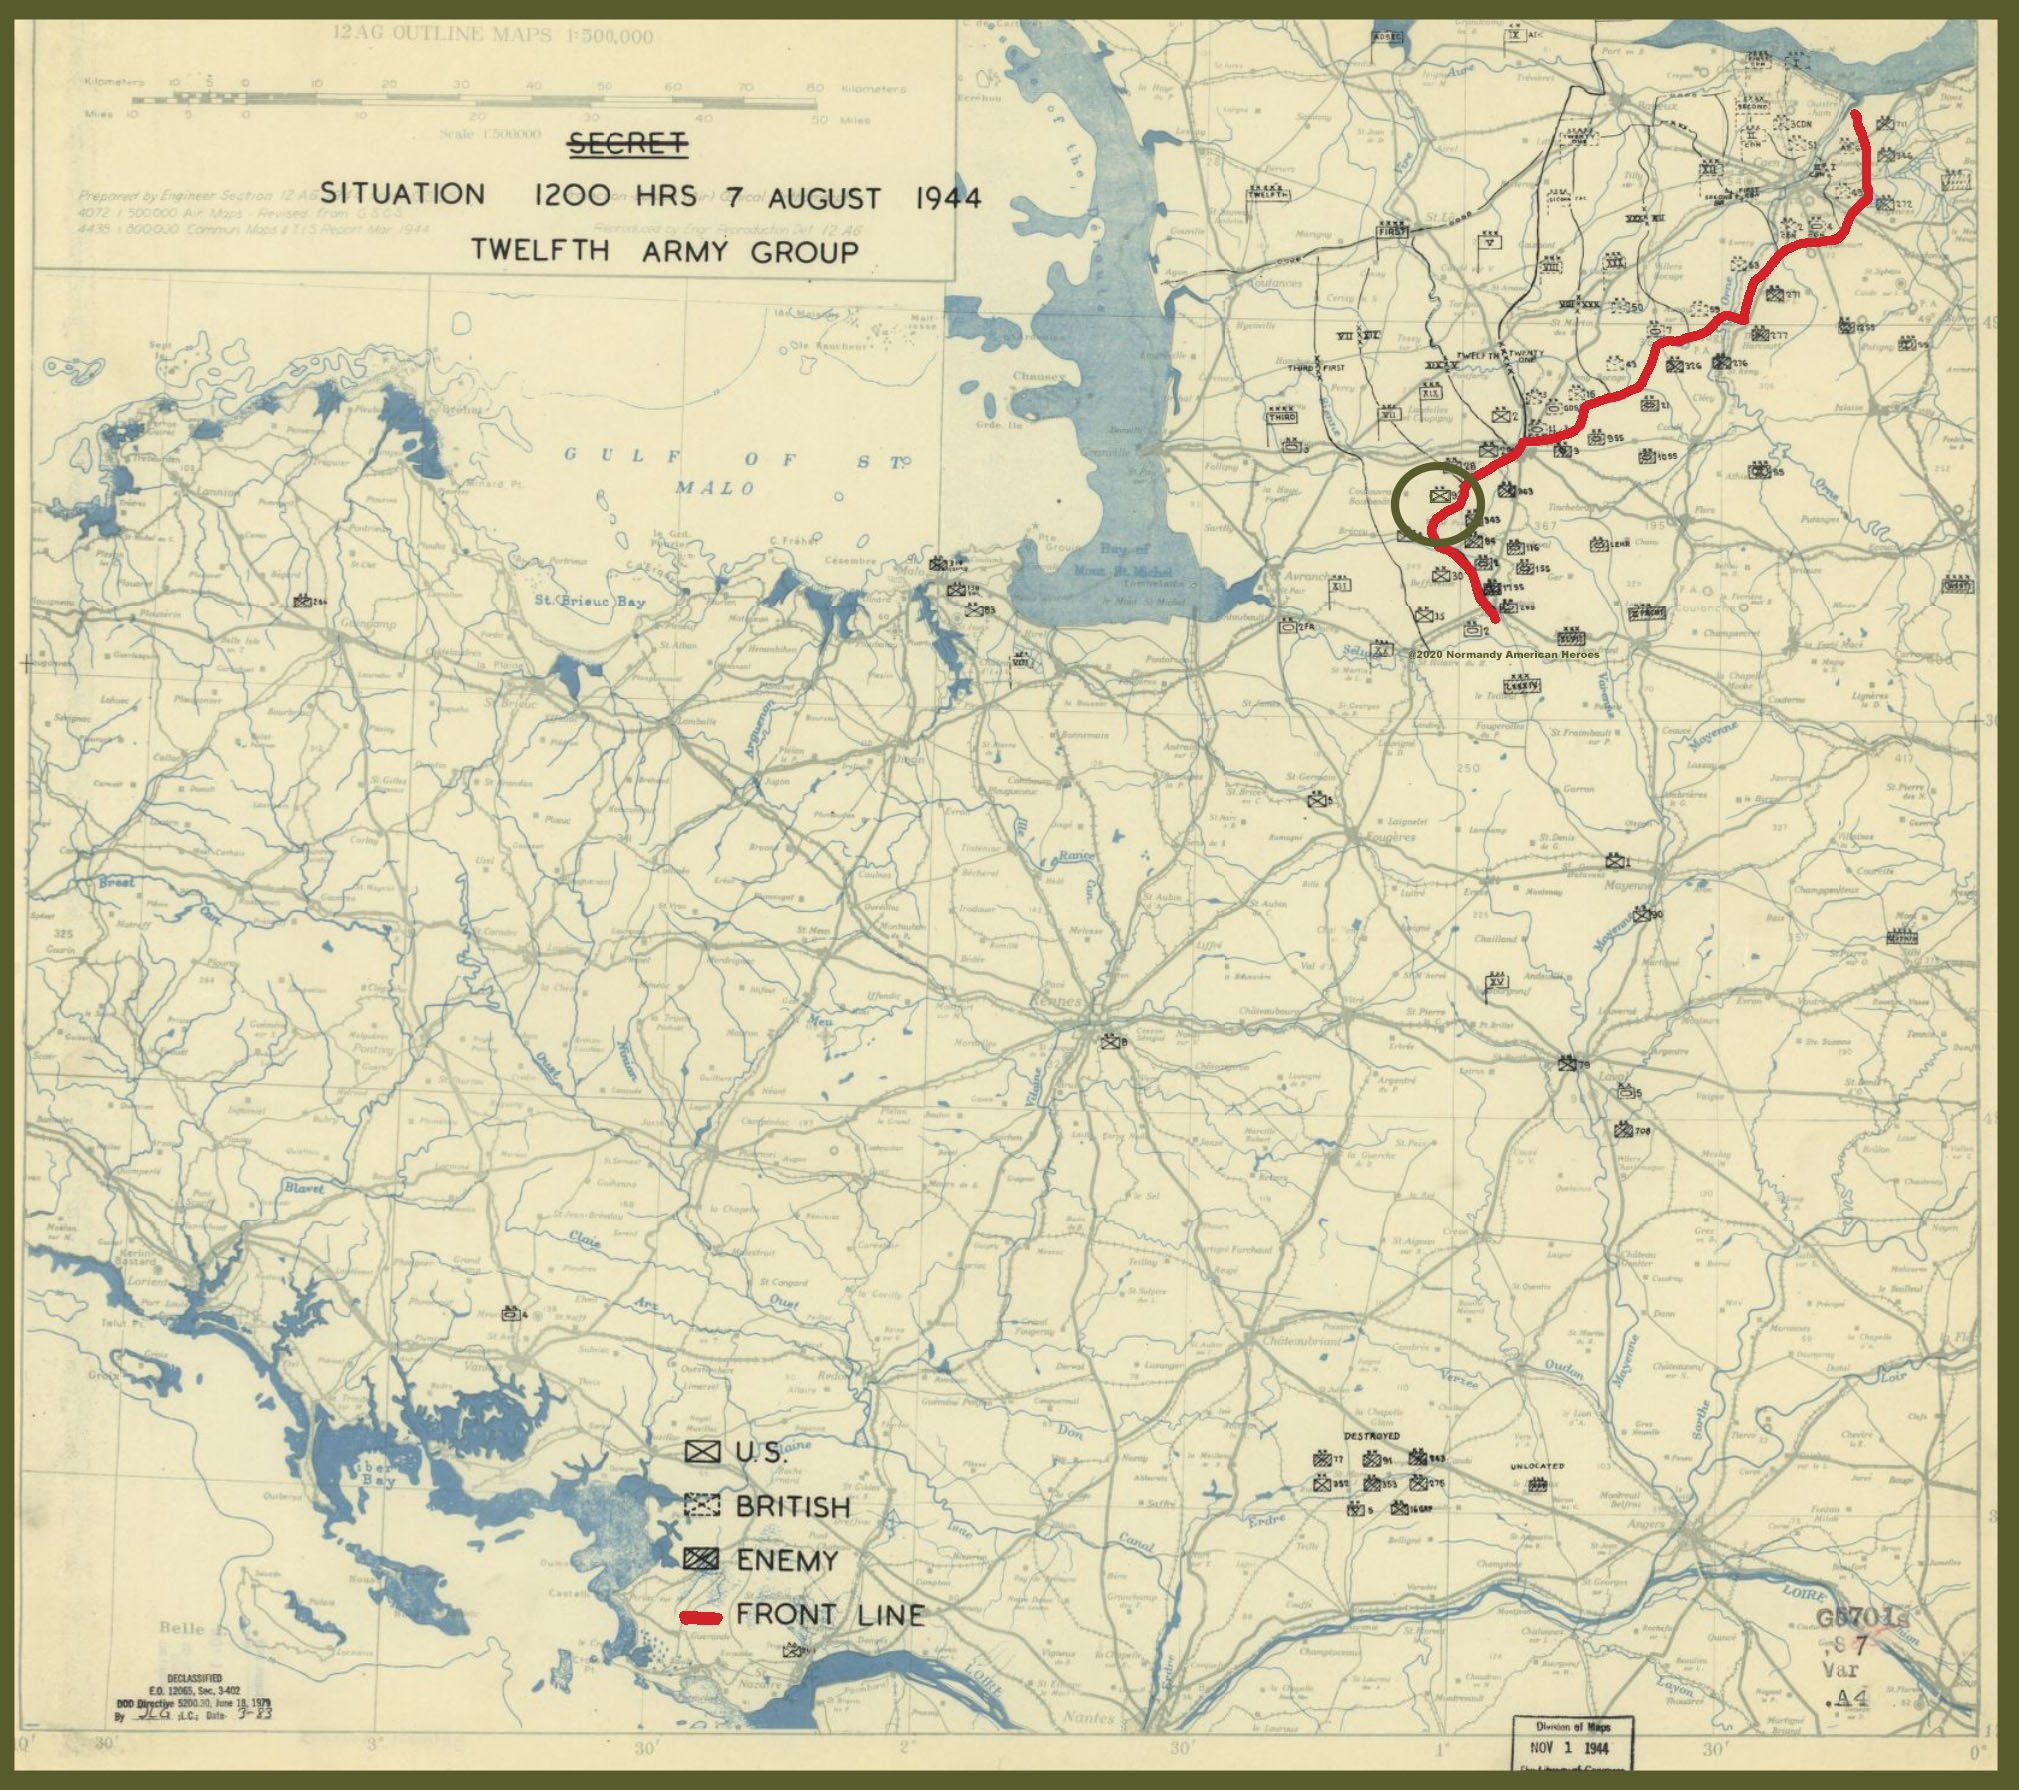 HQ Twelfth Army Group situation map 7 August 1944 Library of Congress